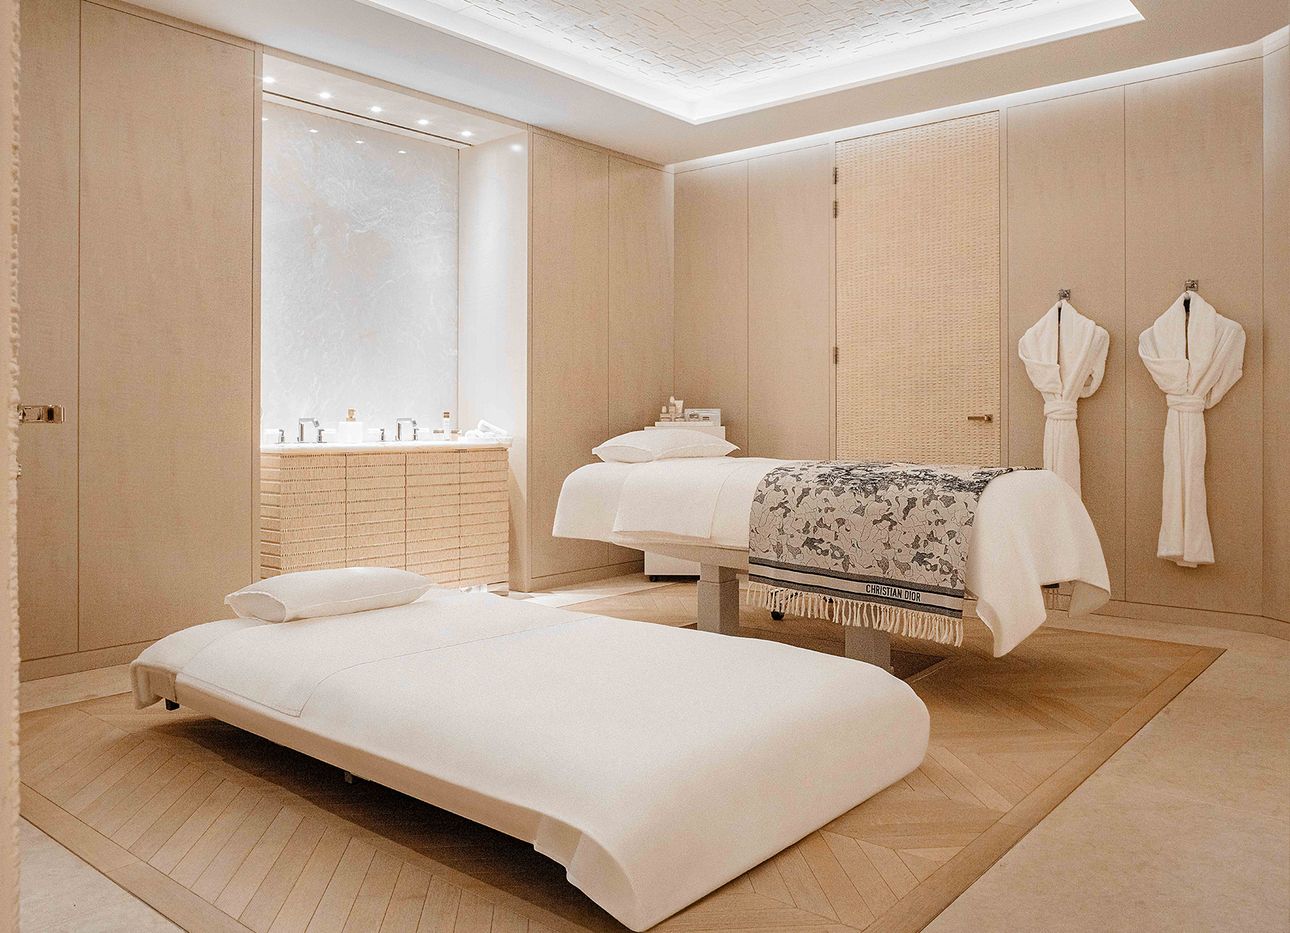 At the Cheval Blanc Paris, a Dior Spa Offers a Multisensory Oasis